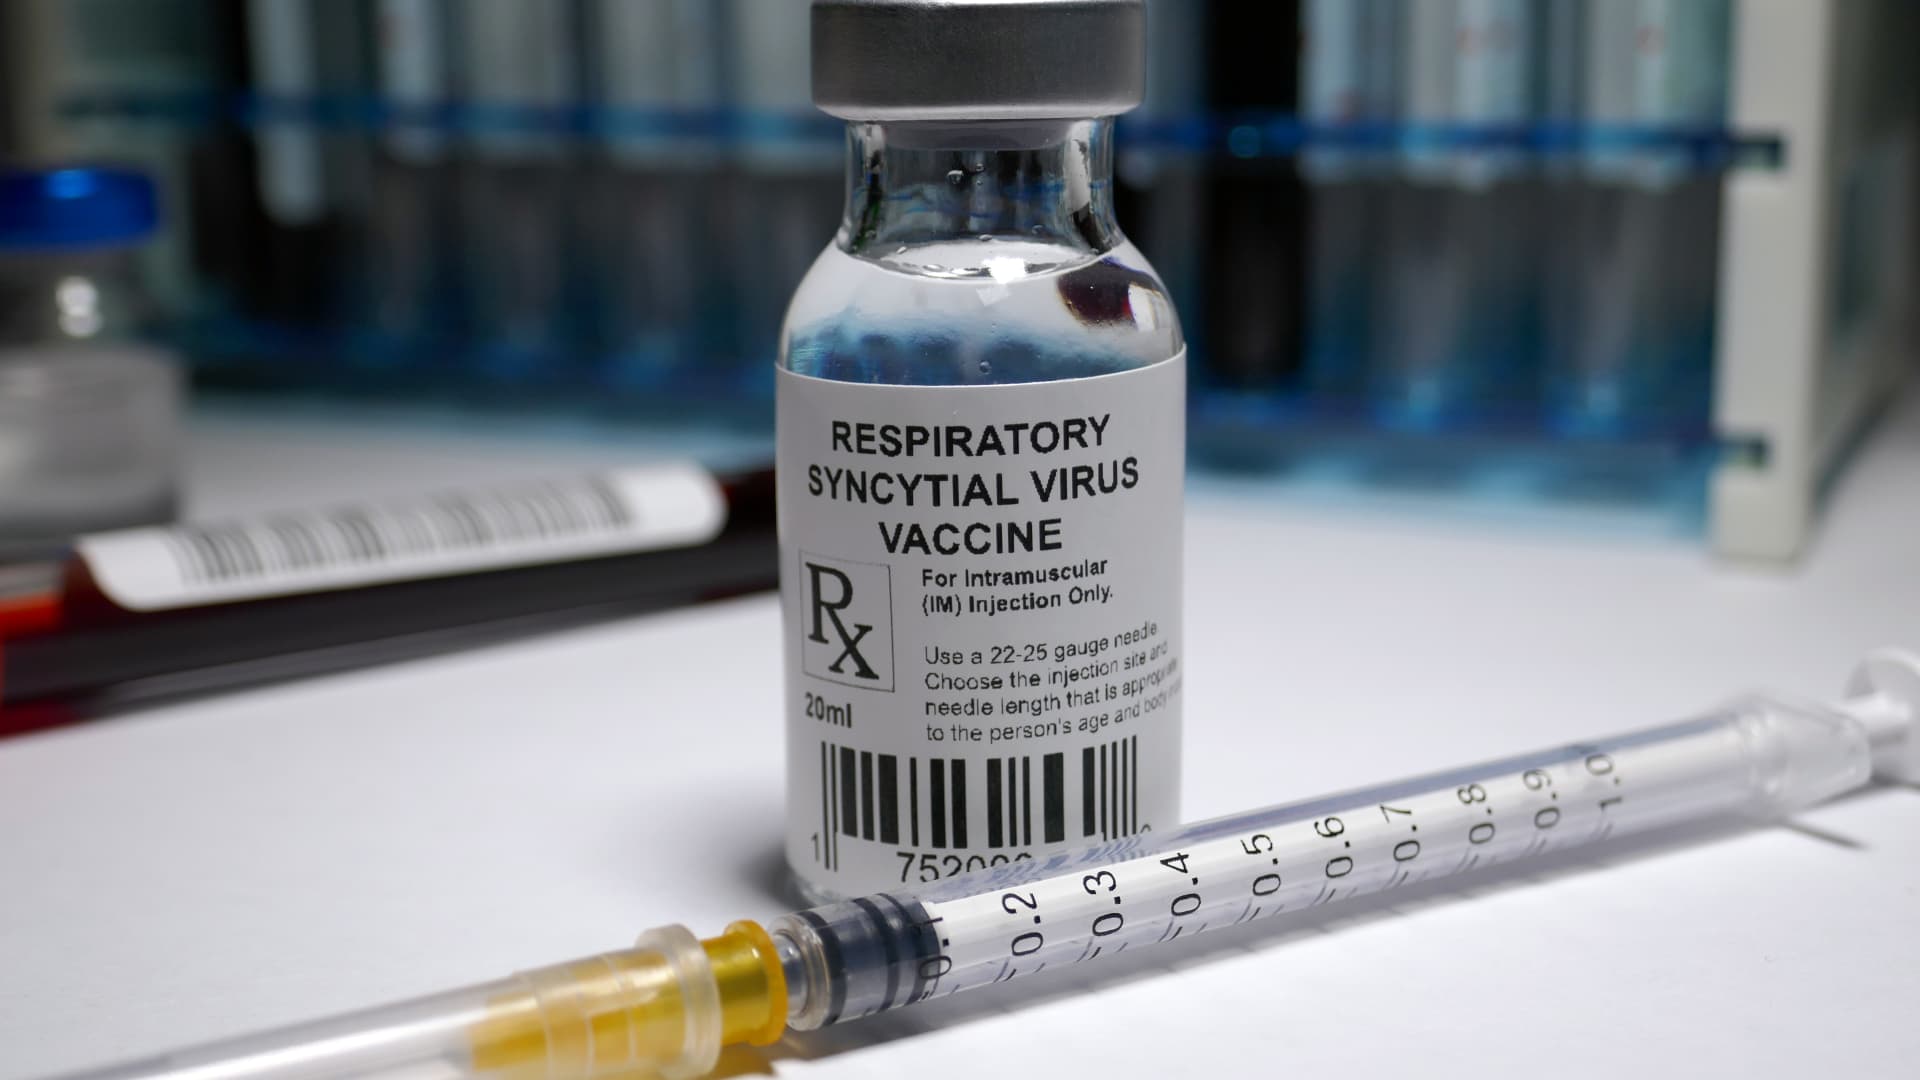 Respiratory syncytial virus - viral vaccine under research